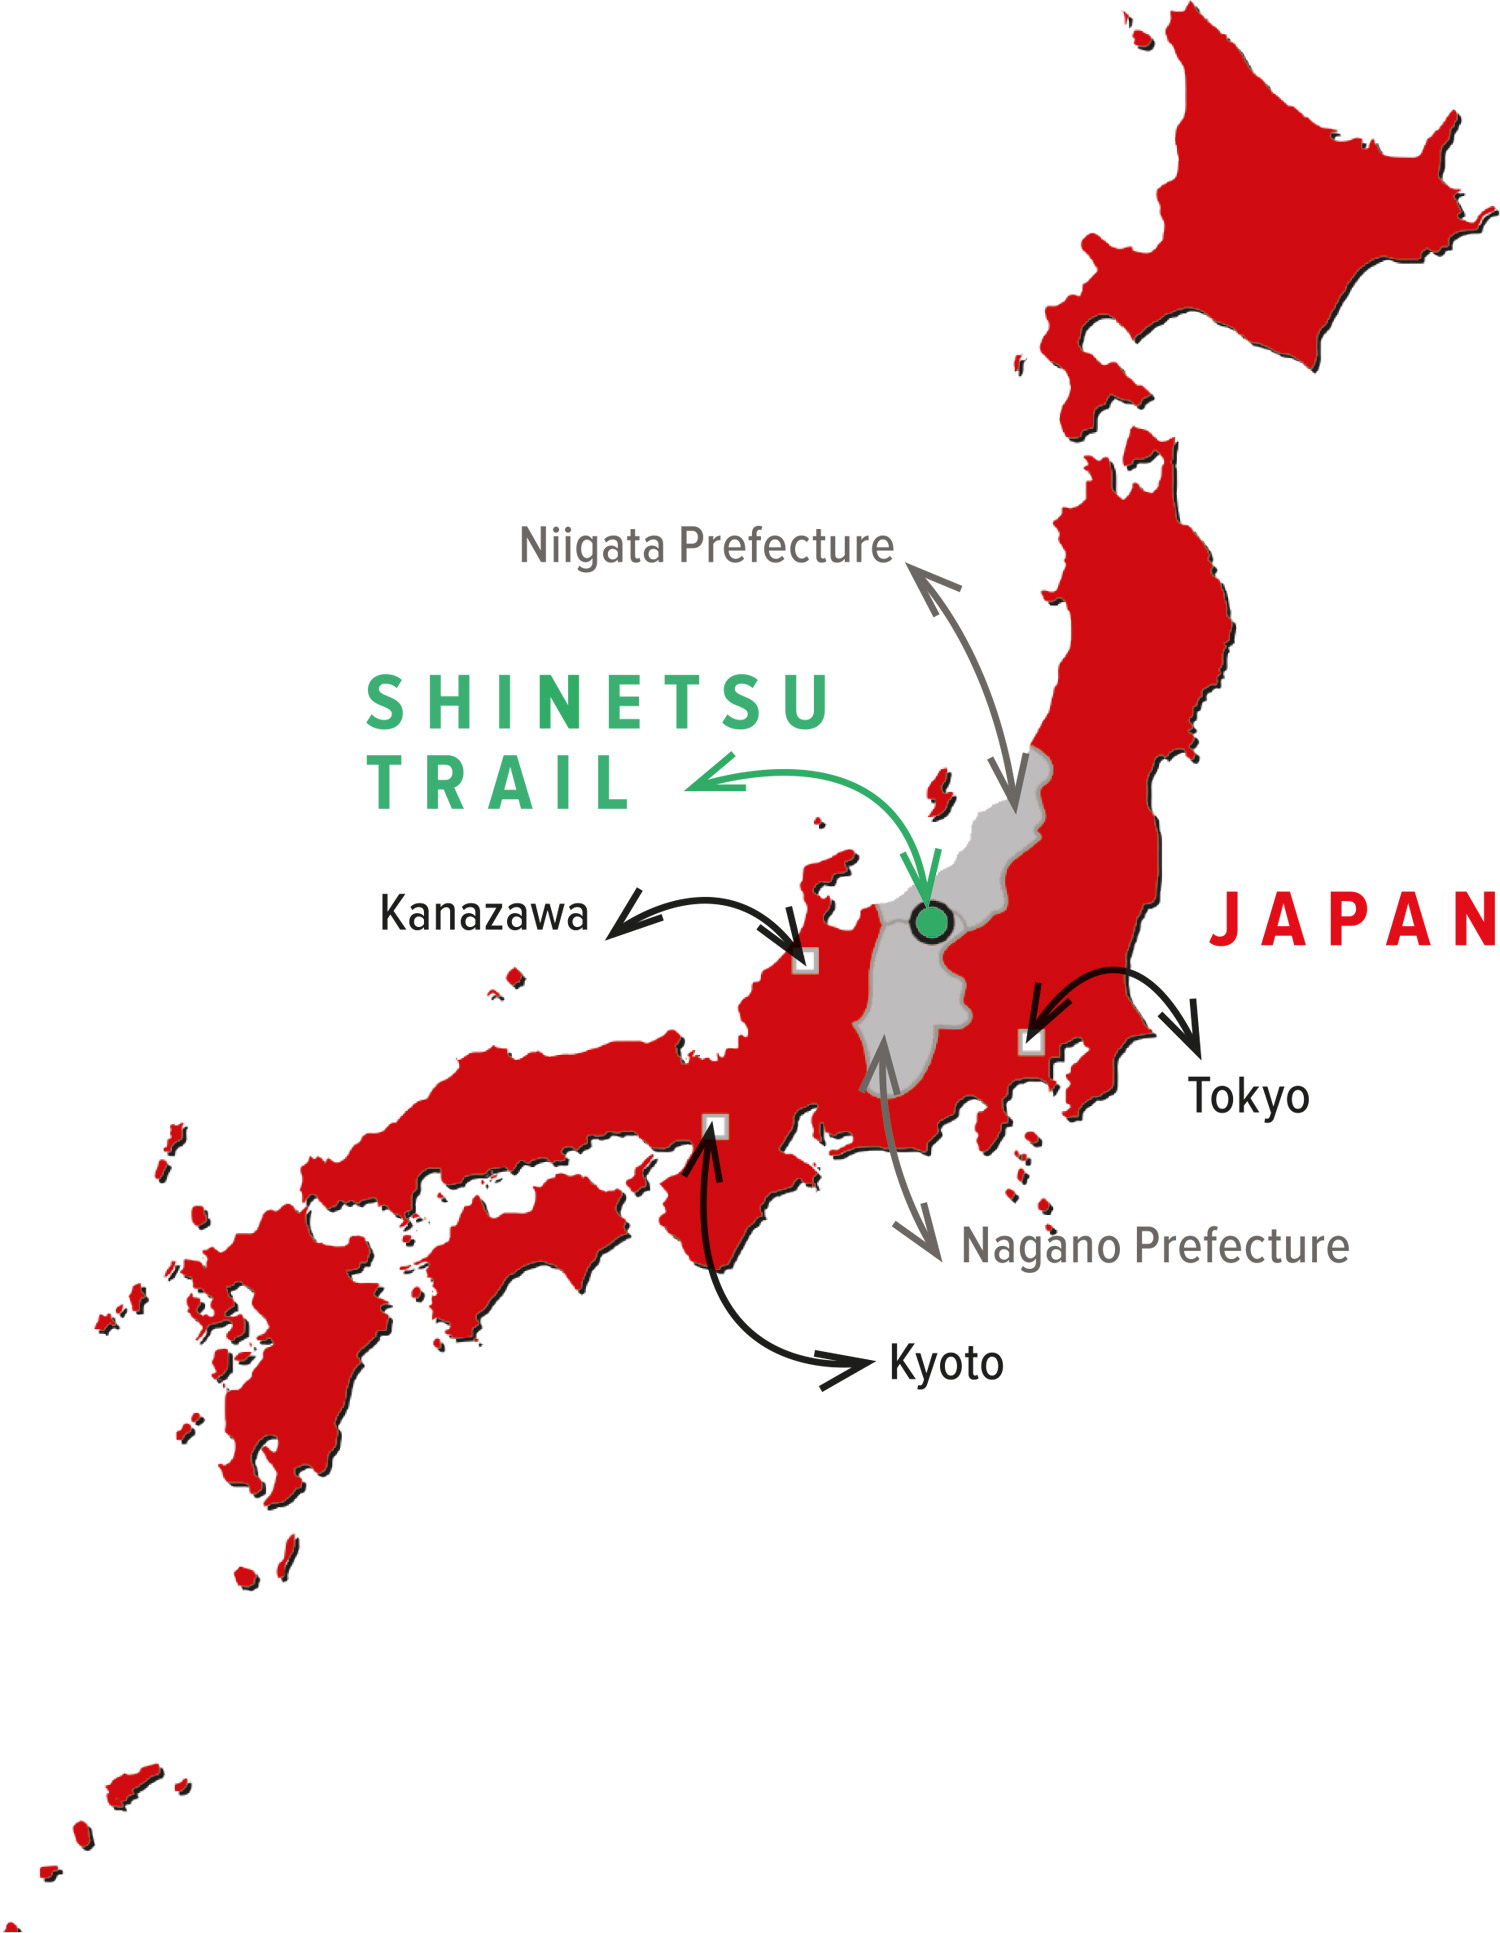 labeled map of Japan with the Shinetsu Trail highlighted